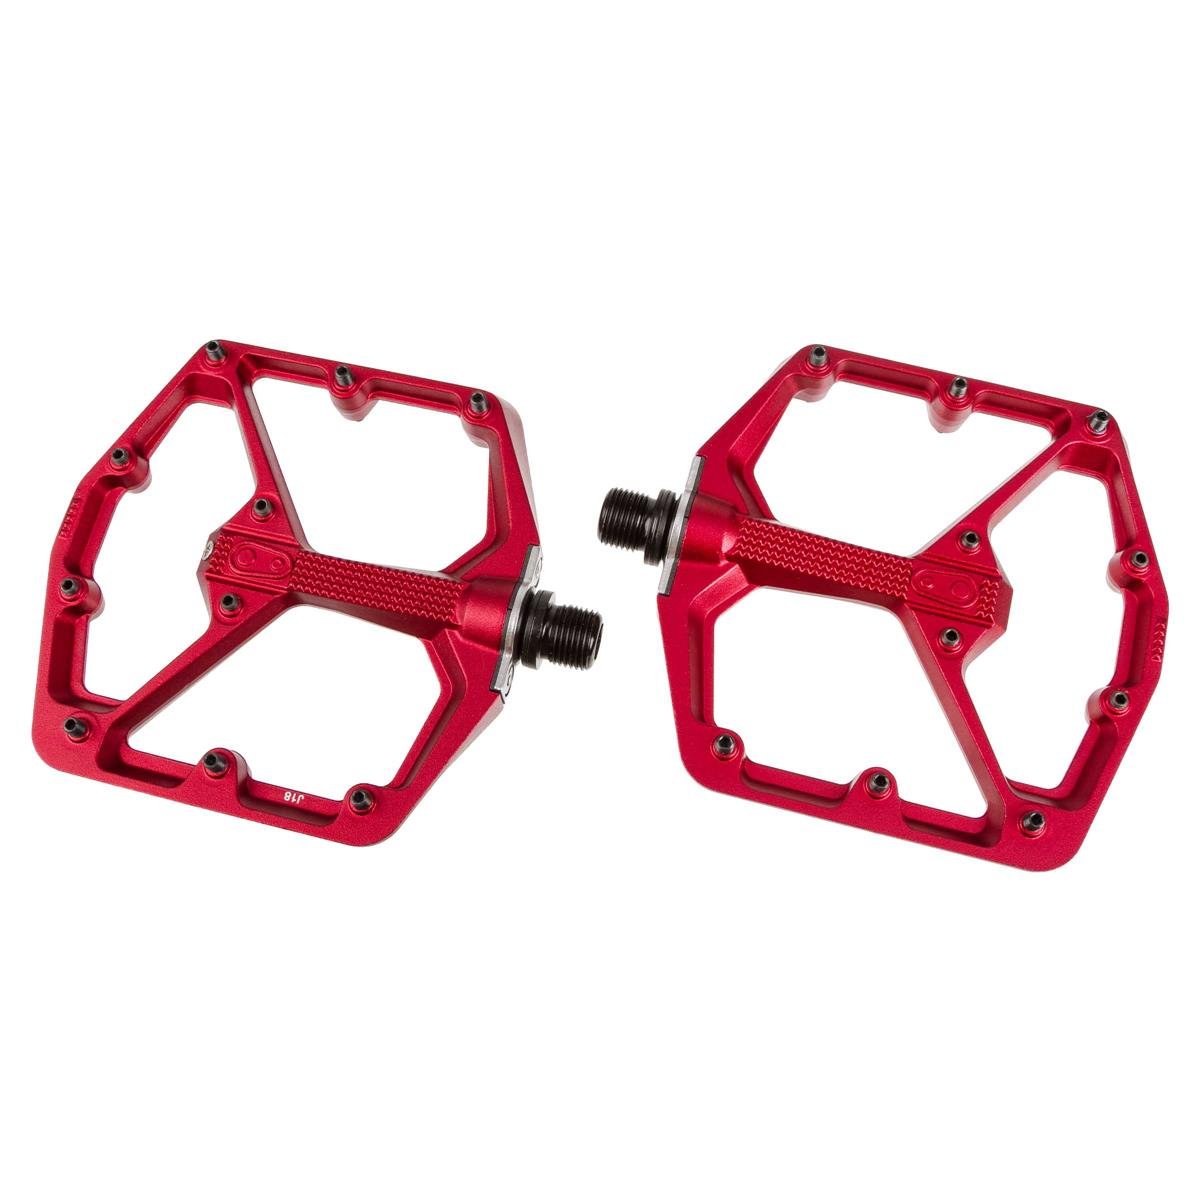 Crankbrothers Pedals Stamp 7 Red, Large